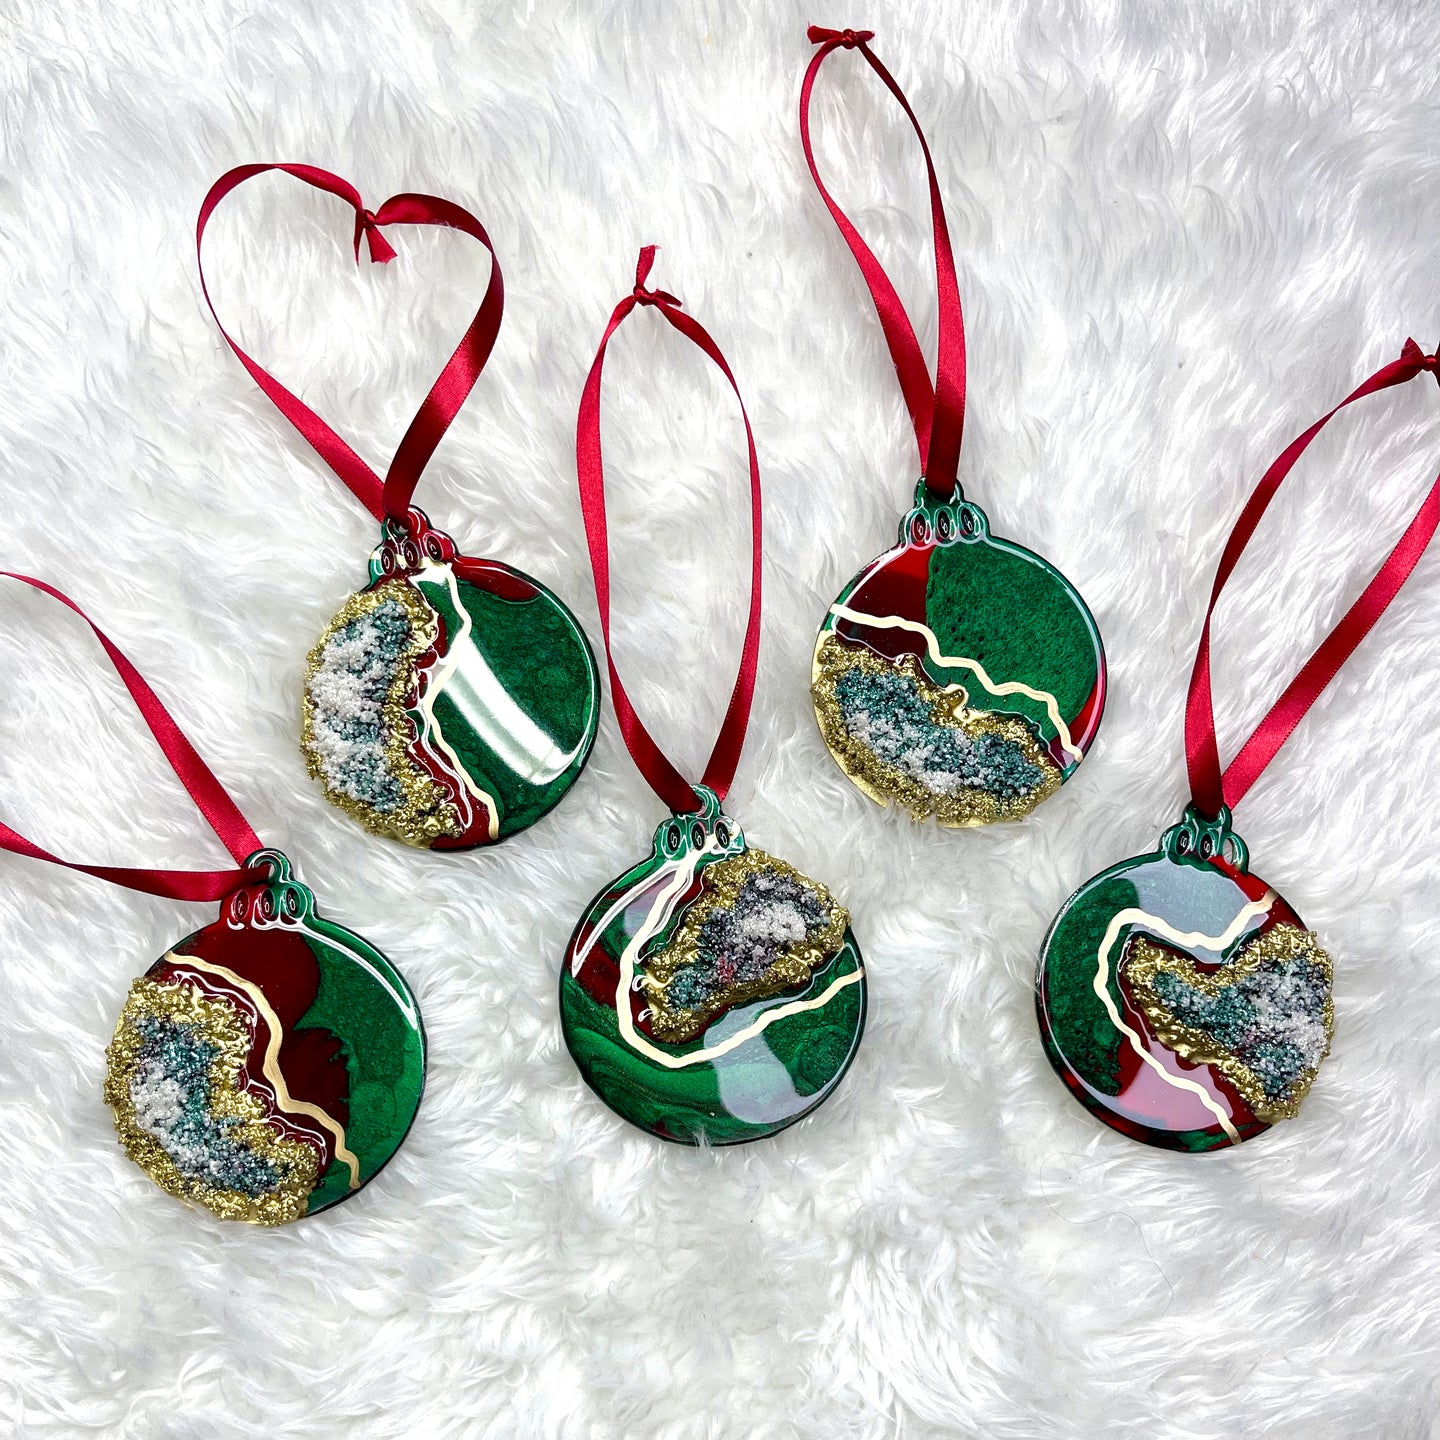 Luxe Geode Ornaments - 5 Count Set - Red, Green & Gold